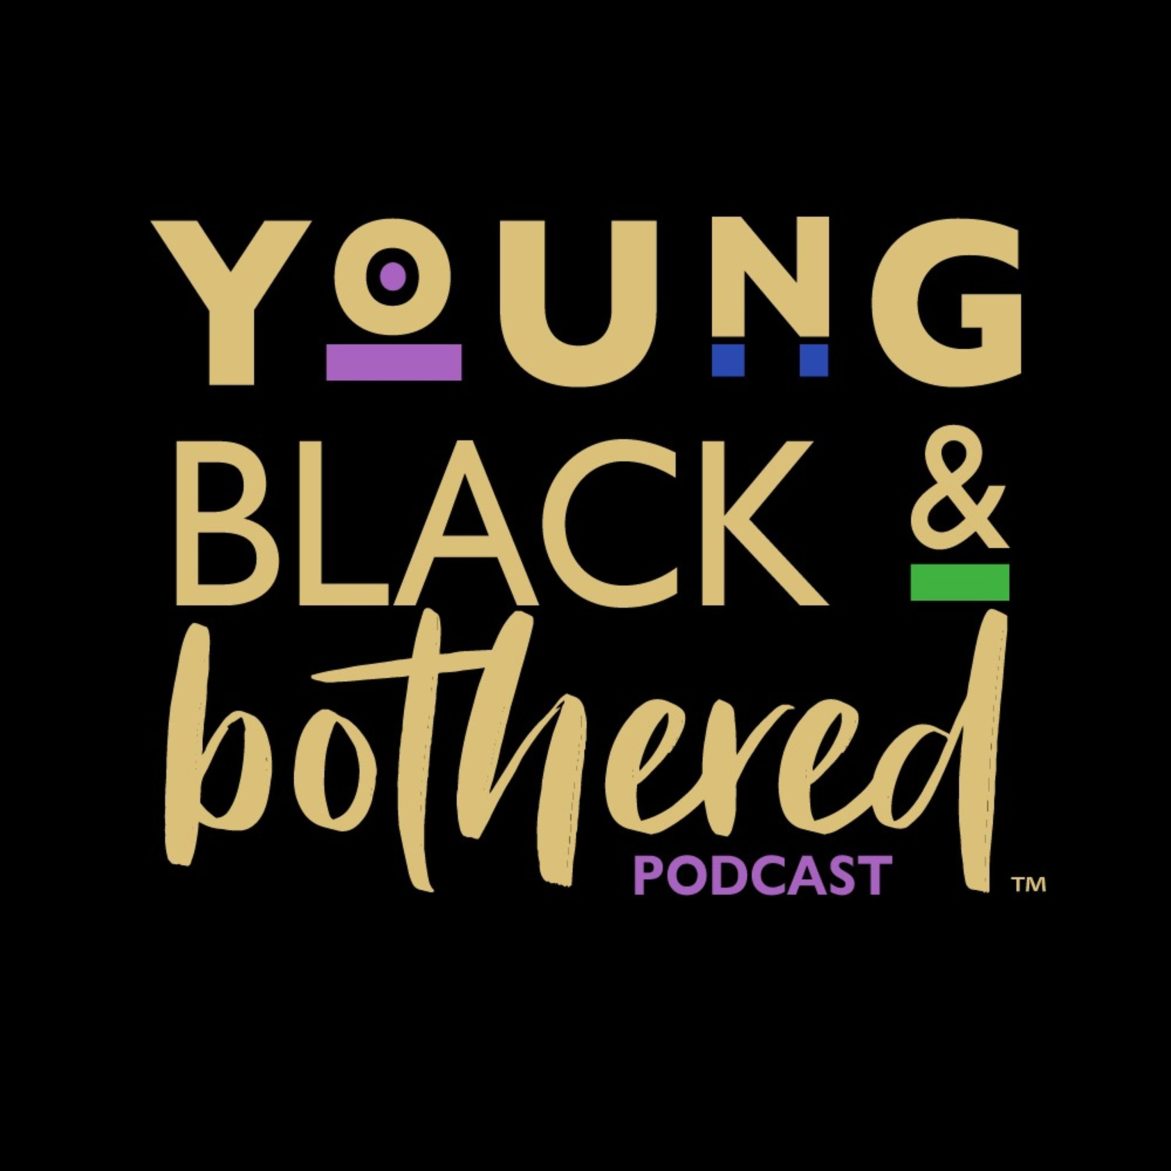 Black Podcasting - 29: What's Blessing You?